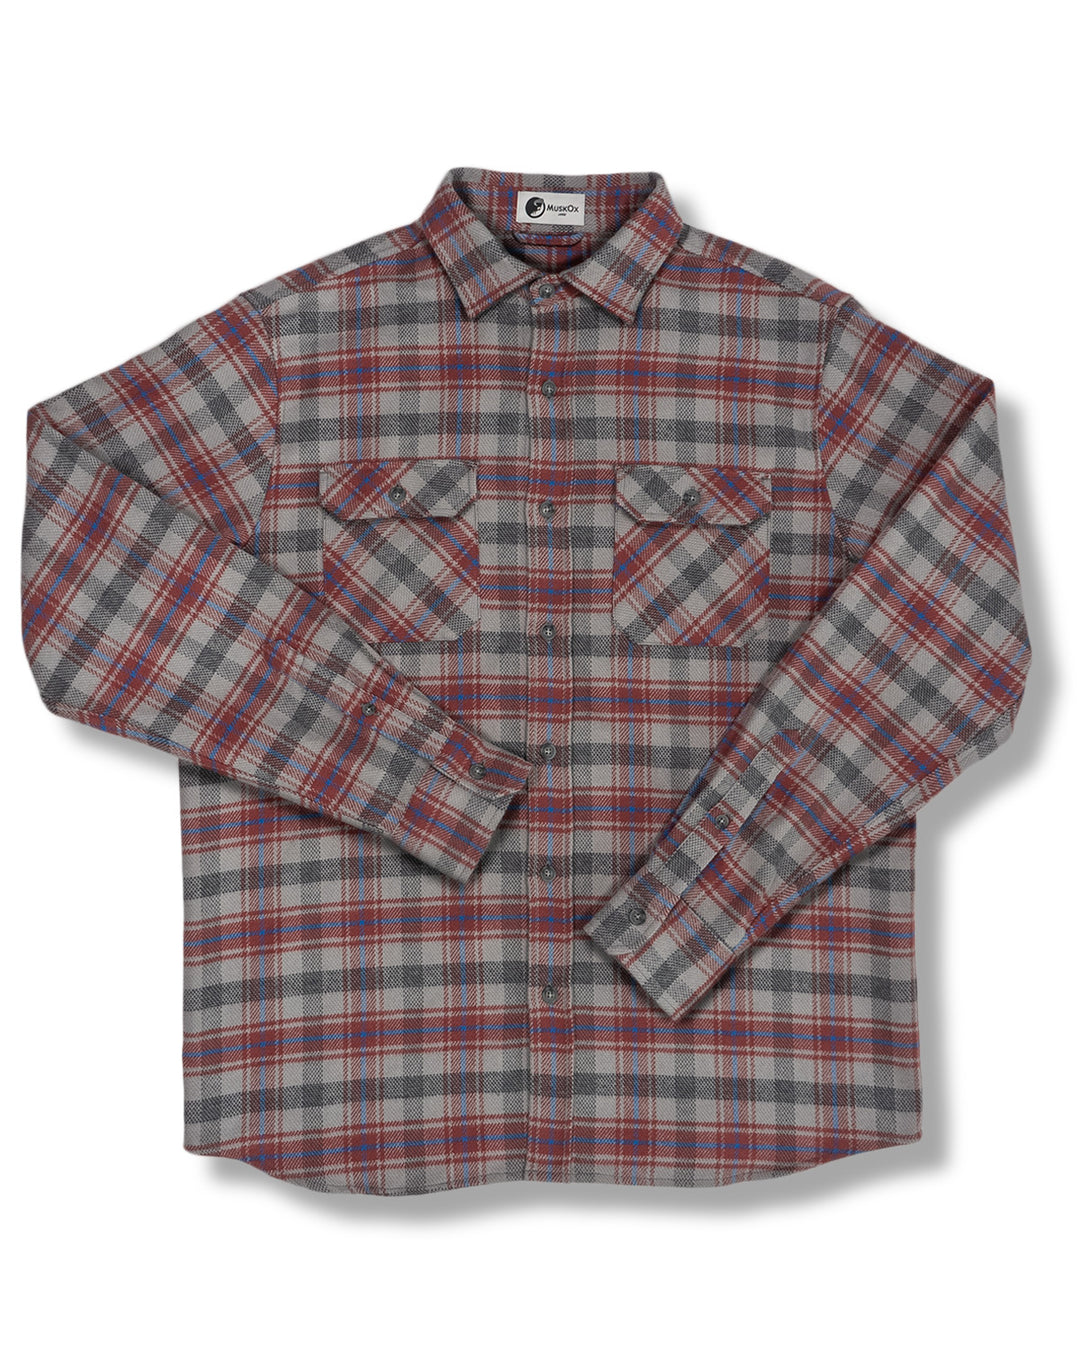 Field Grand Flannel, Heavyweight and Soft Flannel Shirt for Men – MuskOx  Flannels